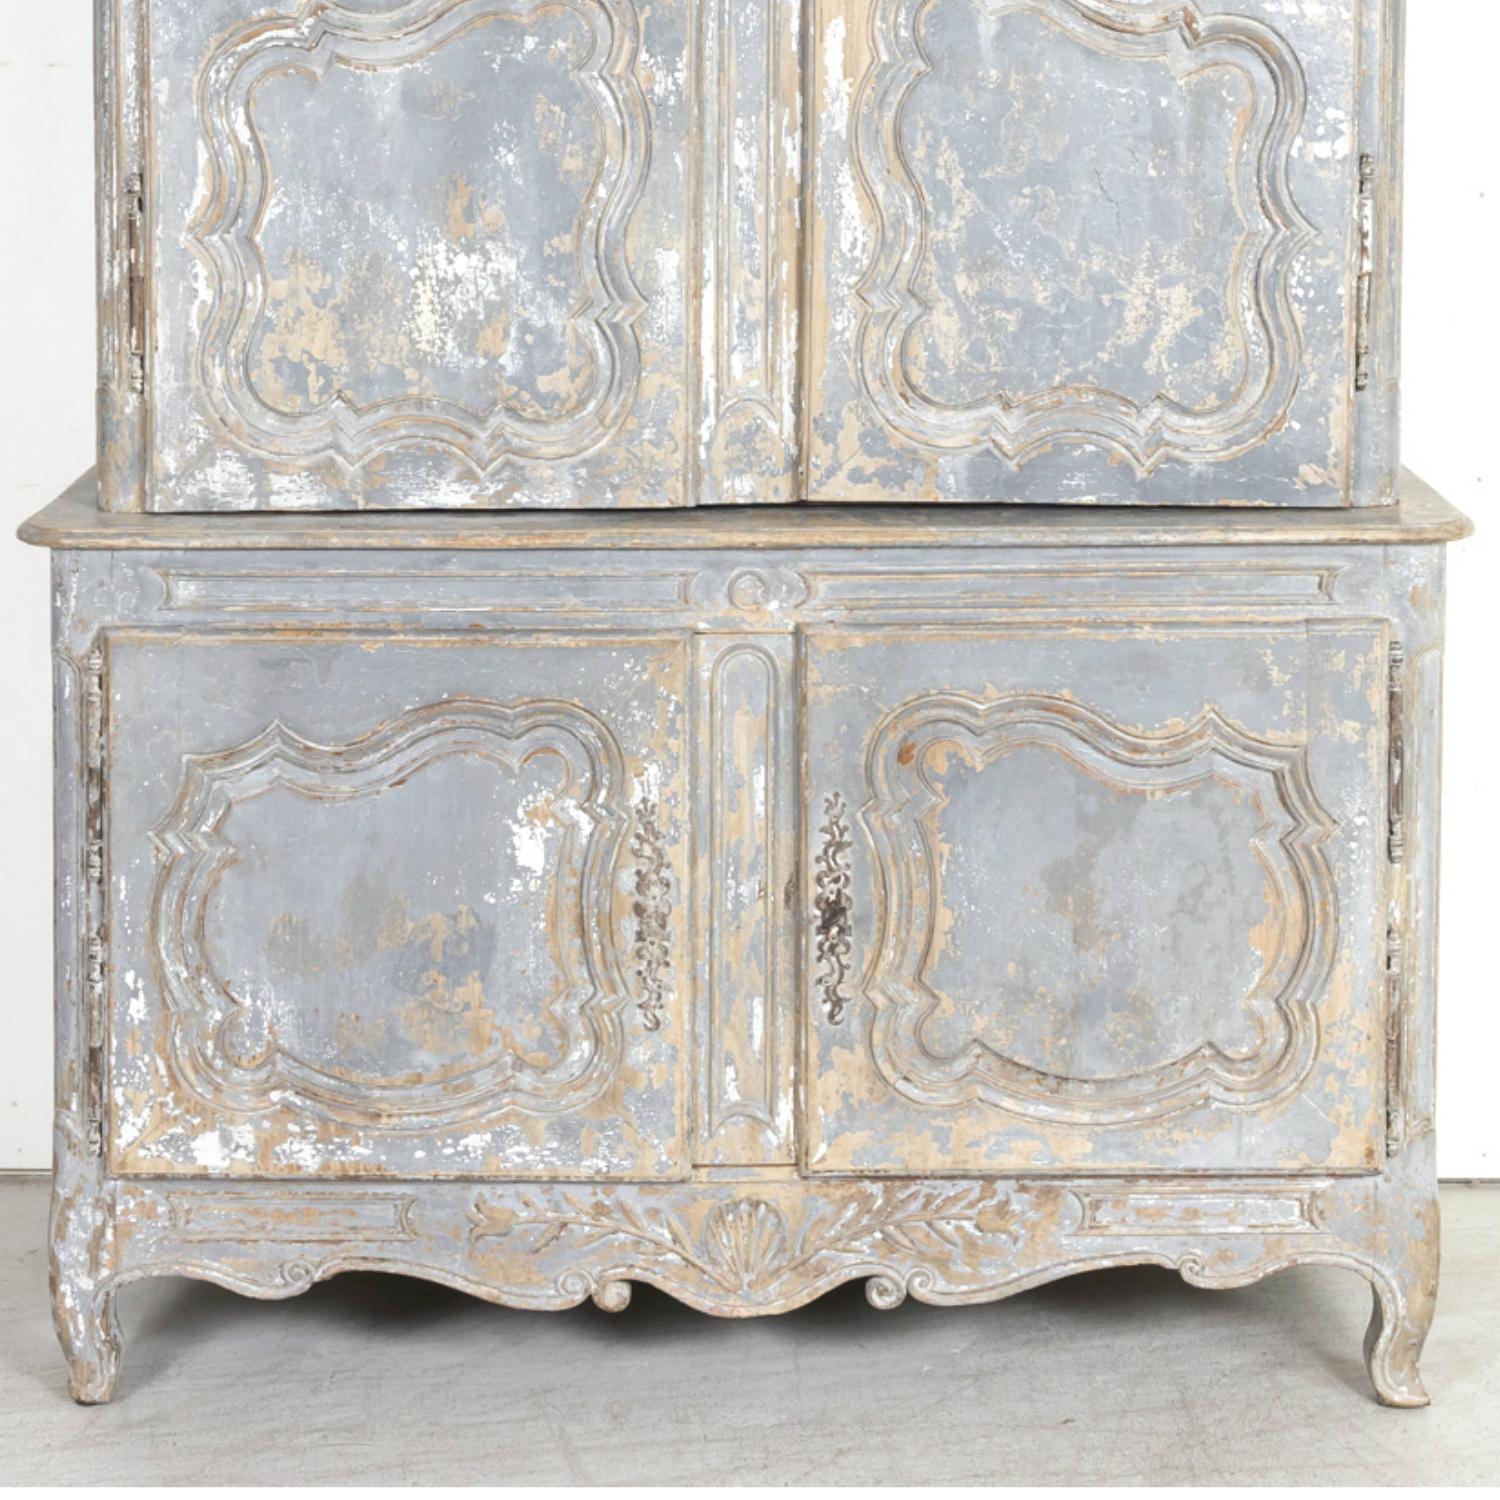 Mid-19th Century 19th Century French Country Louis XV Style Painted Chateau Buffet Deux Corps